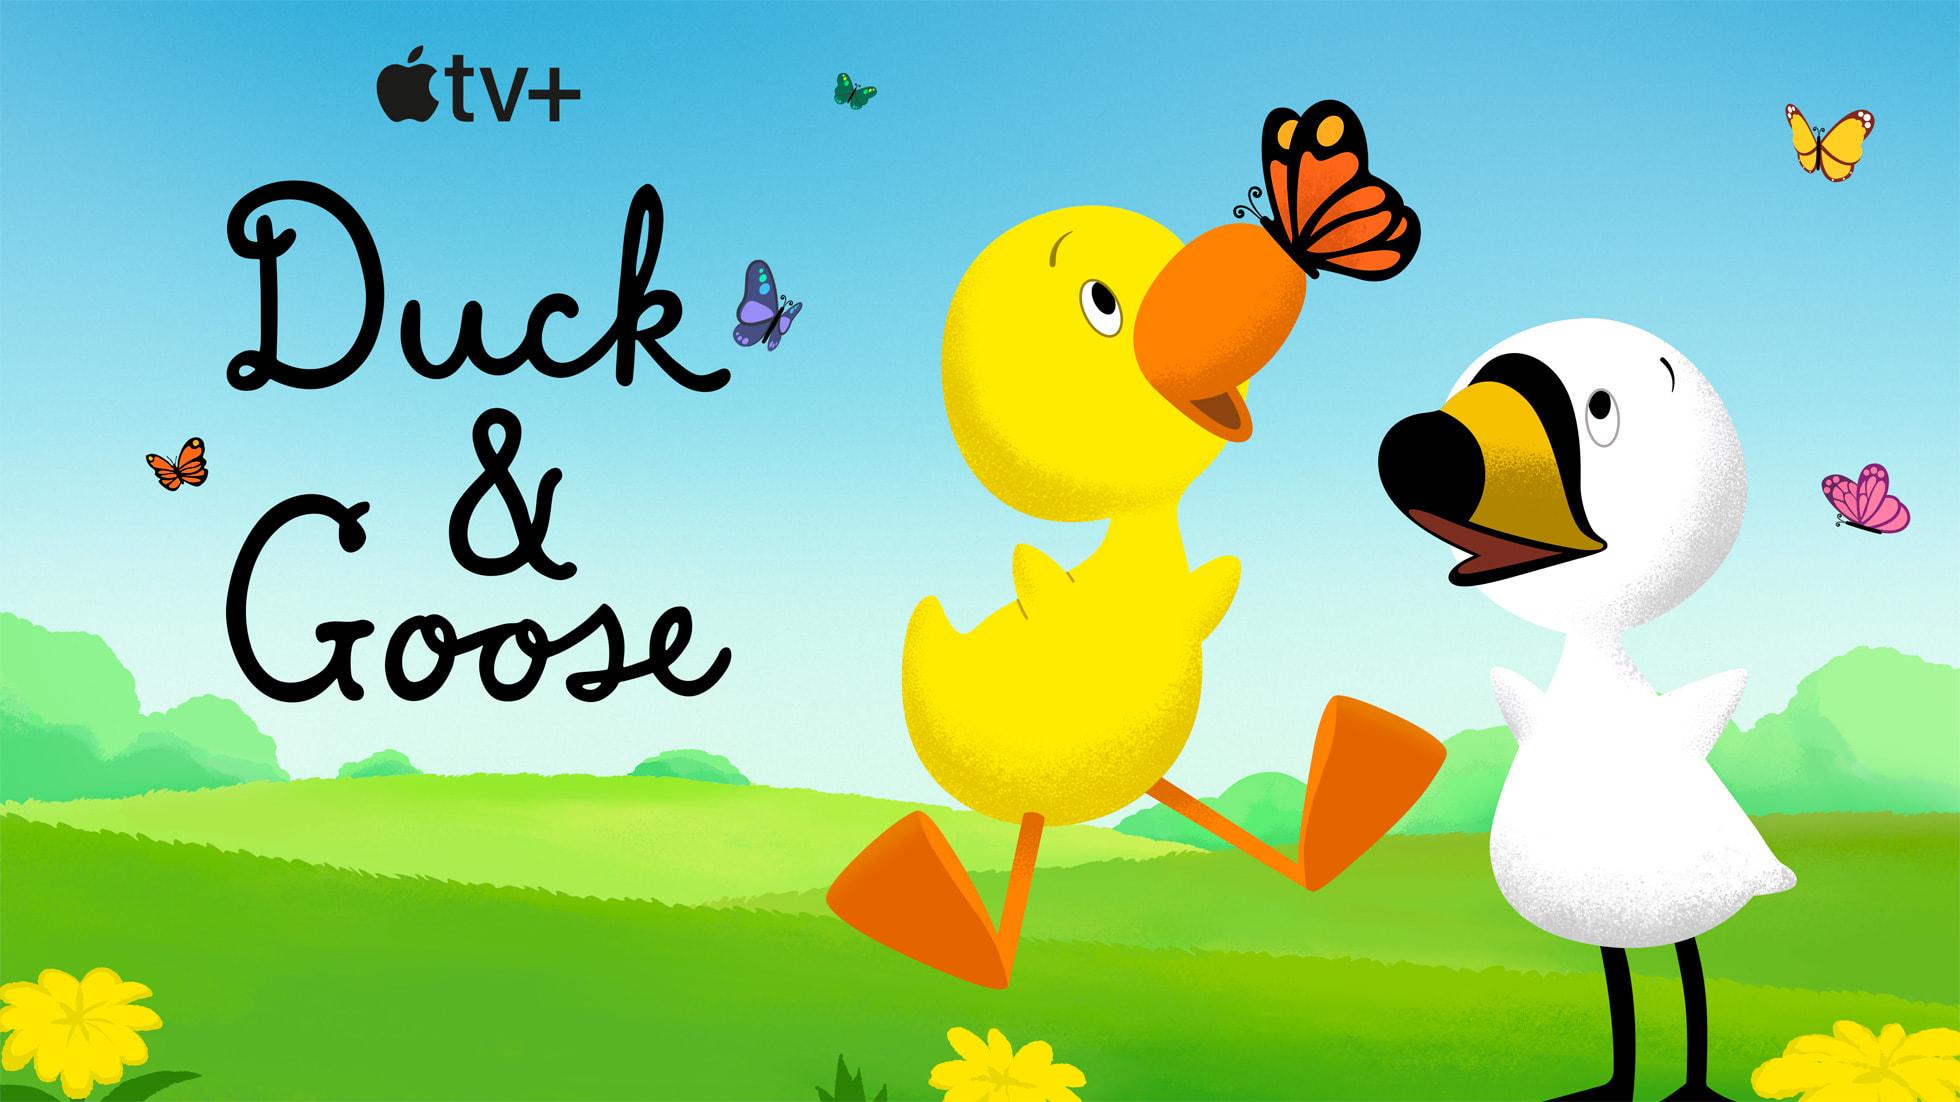 Apple TV+ debuts trailer for the new animated preschool series “Duck & Goose,” premiering globally on Friday, July 8.